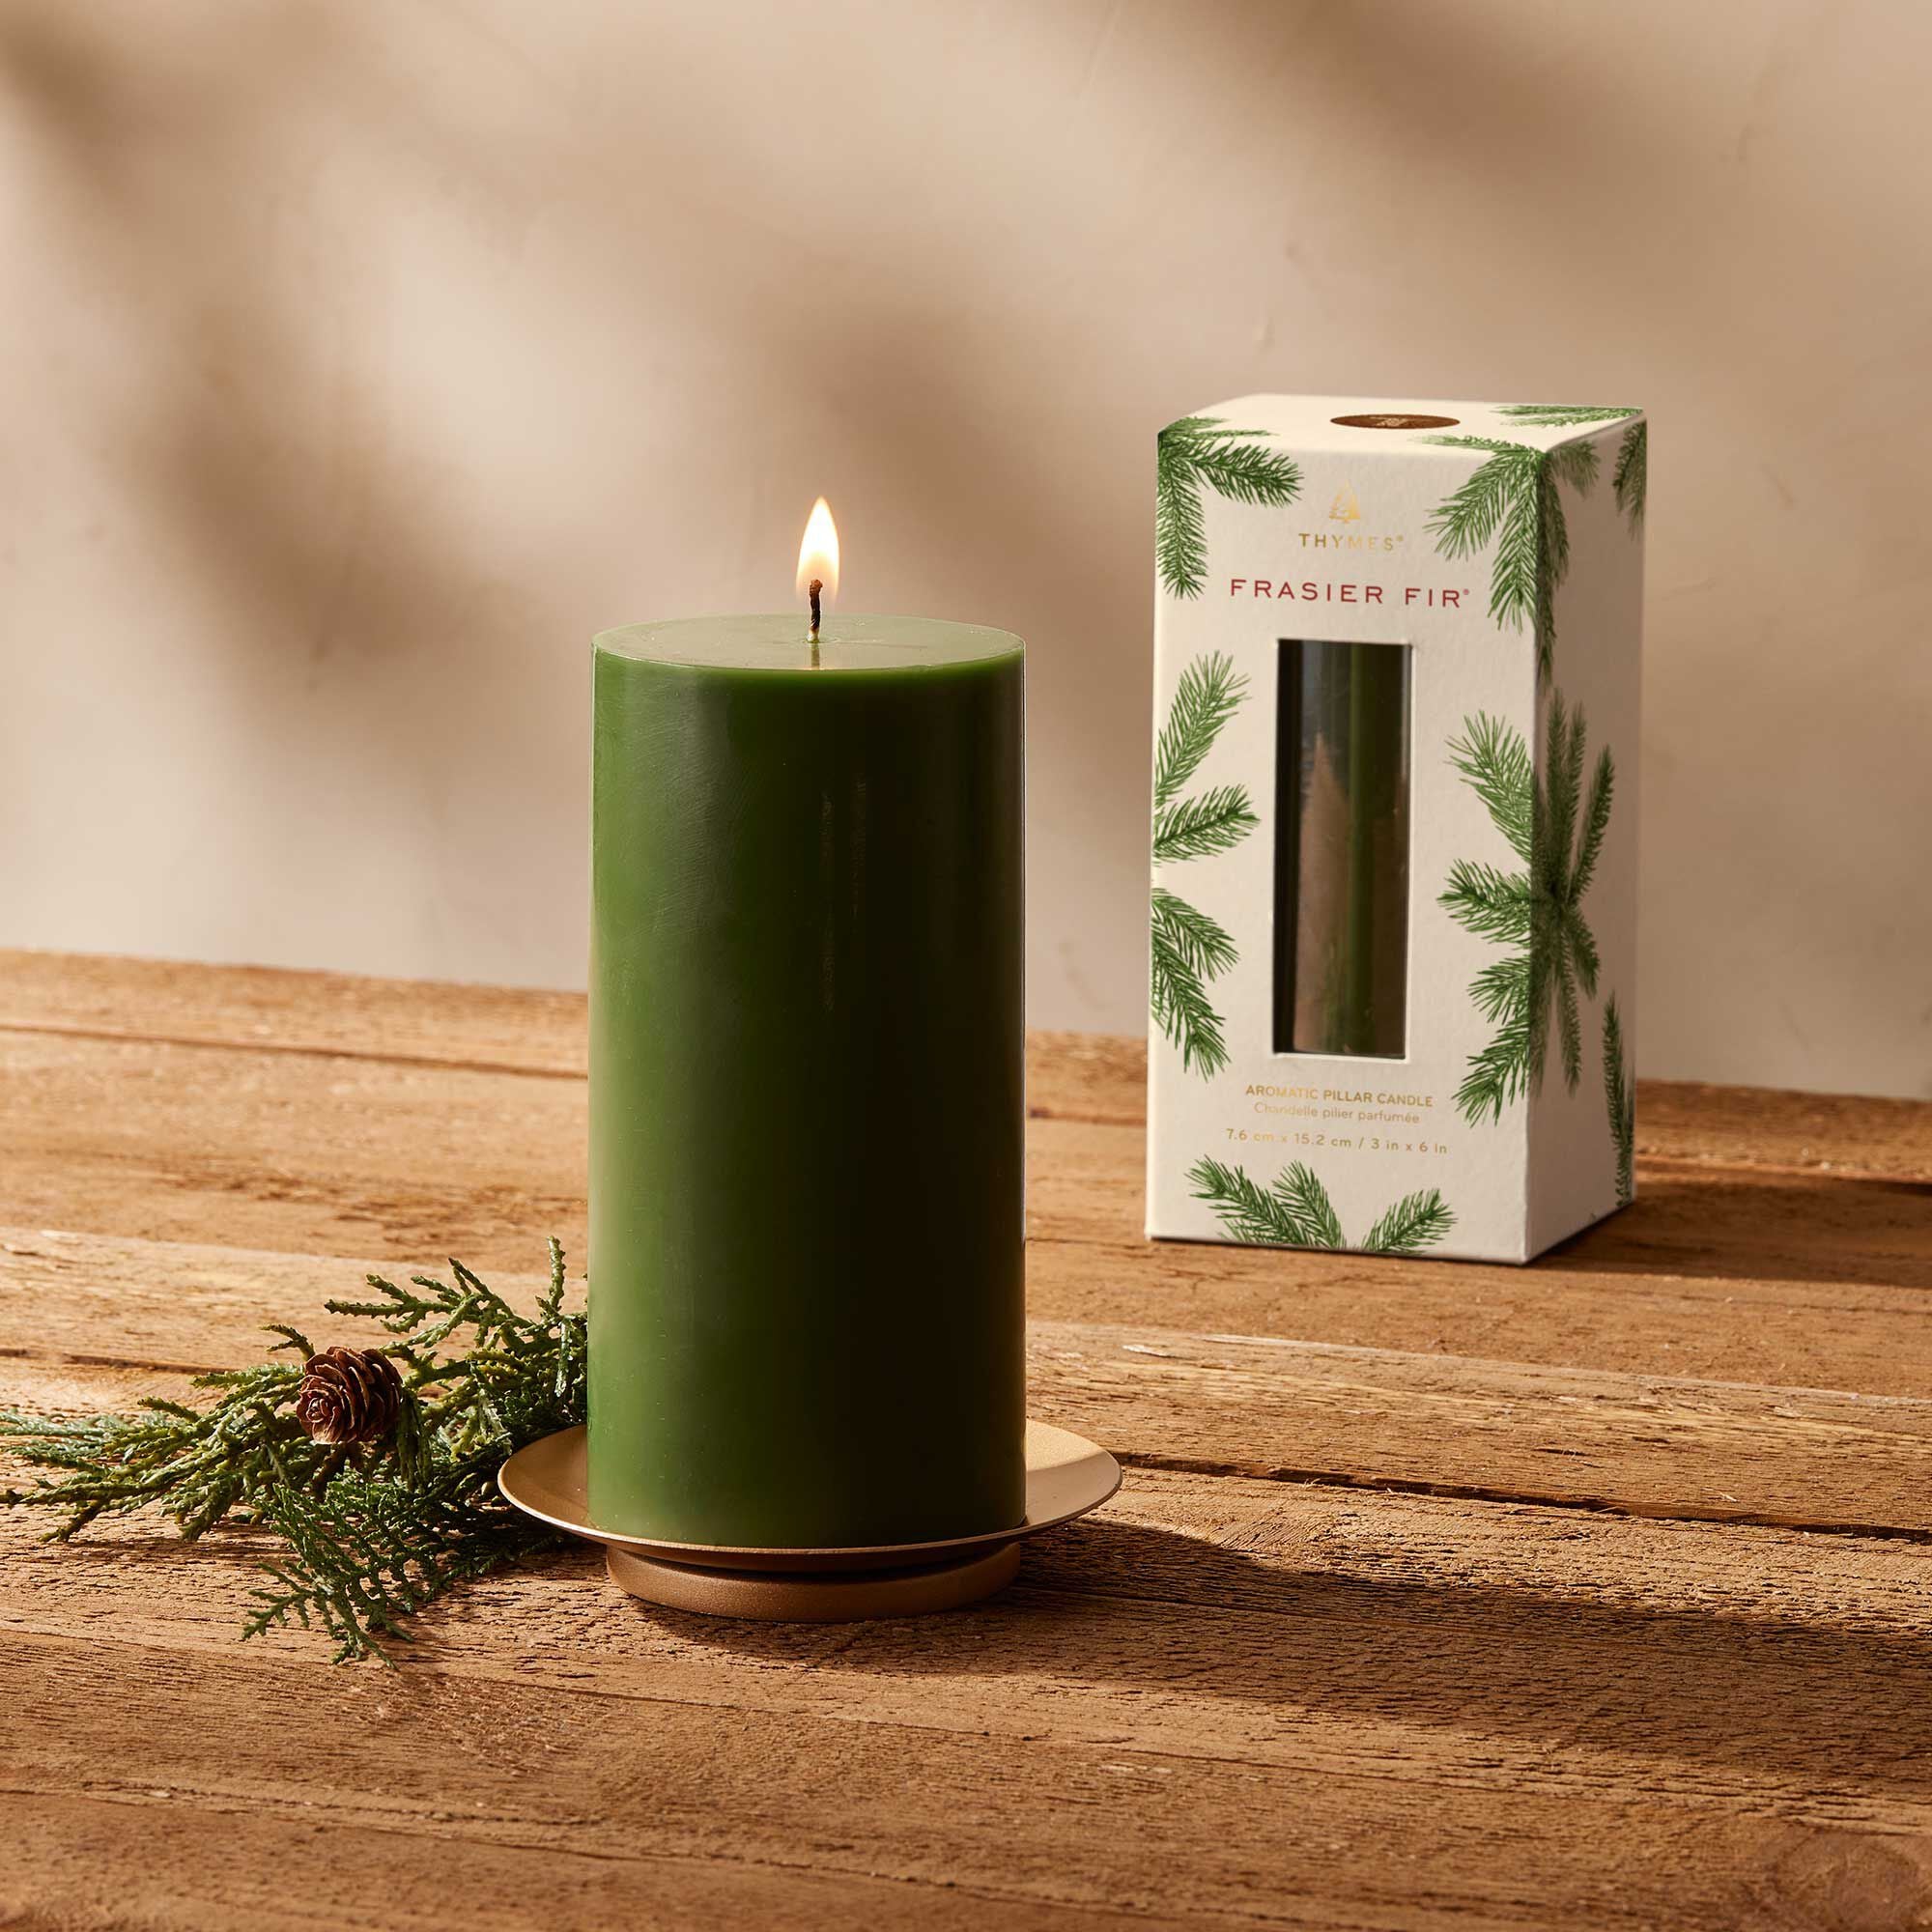 Thymes Simmered Cider Aromatic Votive Trio - Set of Three Votive Candles -  Scented Candles with Notes of Freshly Pressed Apple, Crushed Clove, and